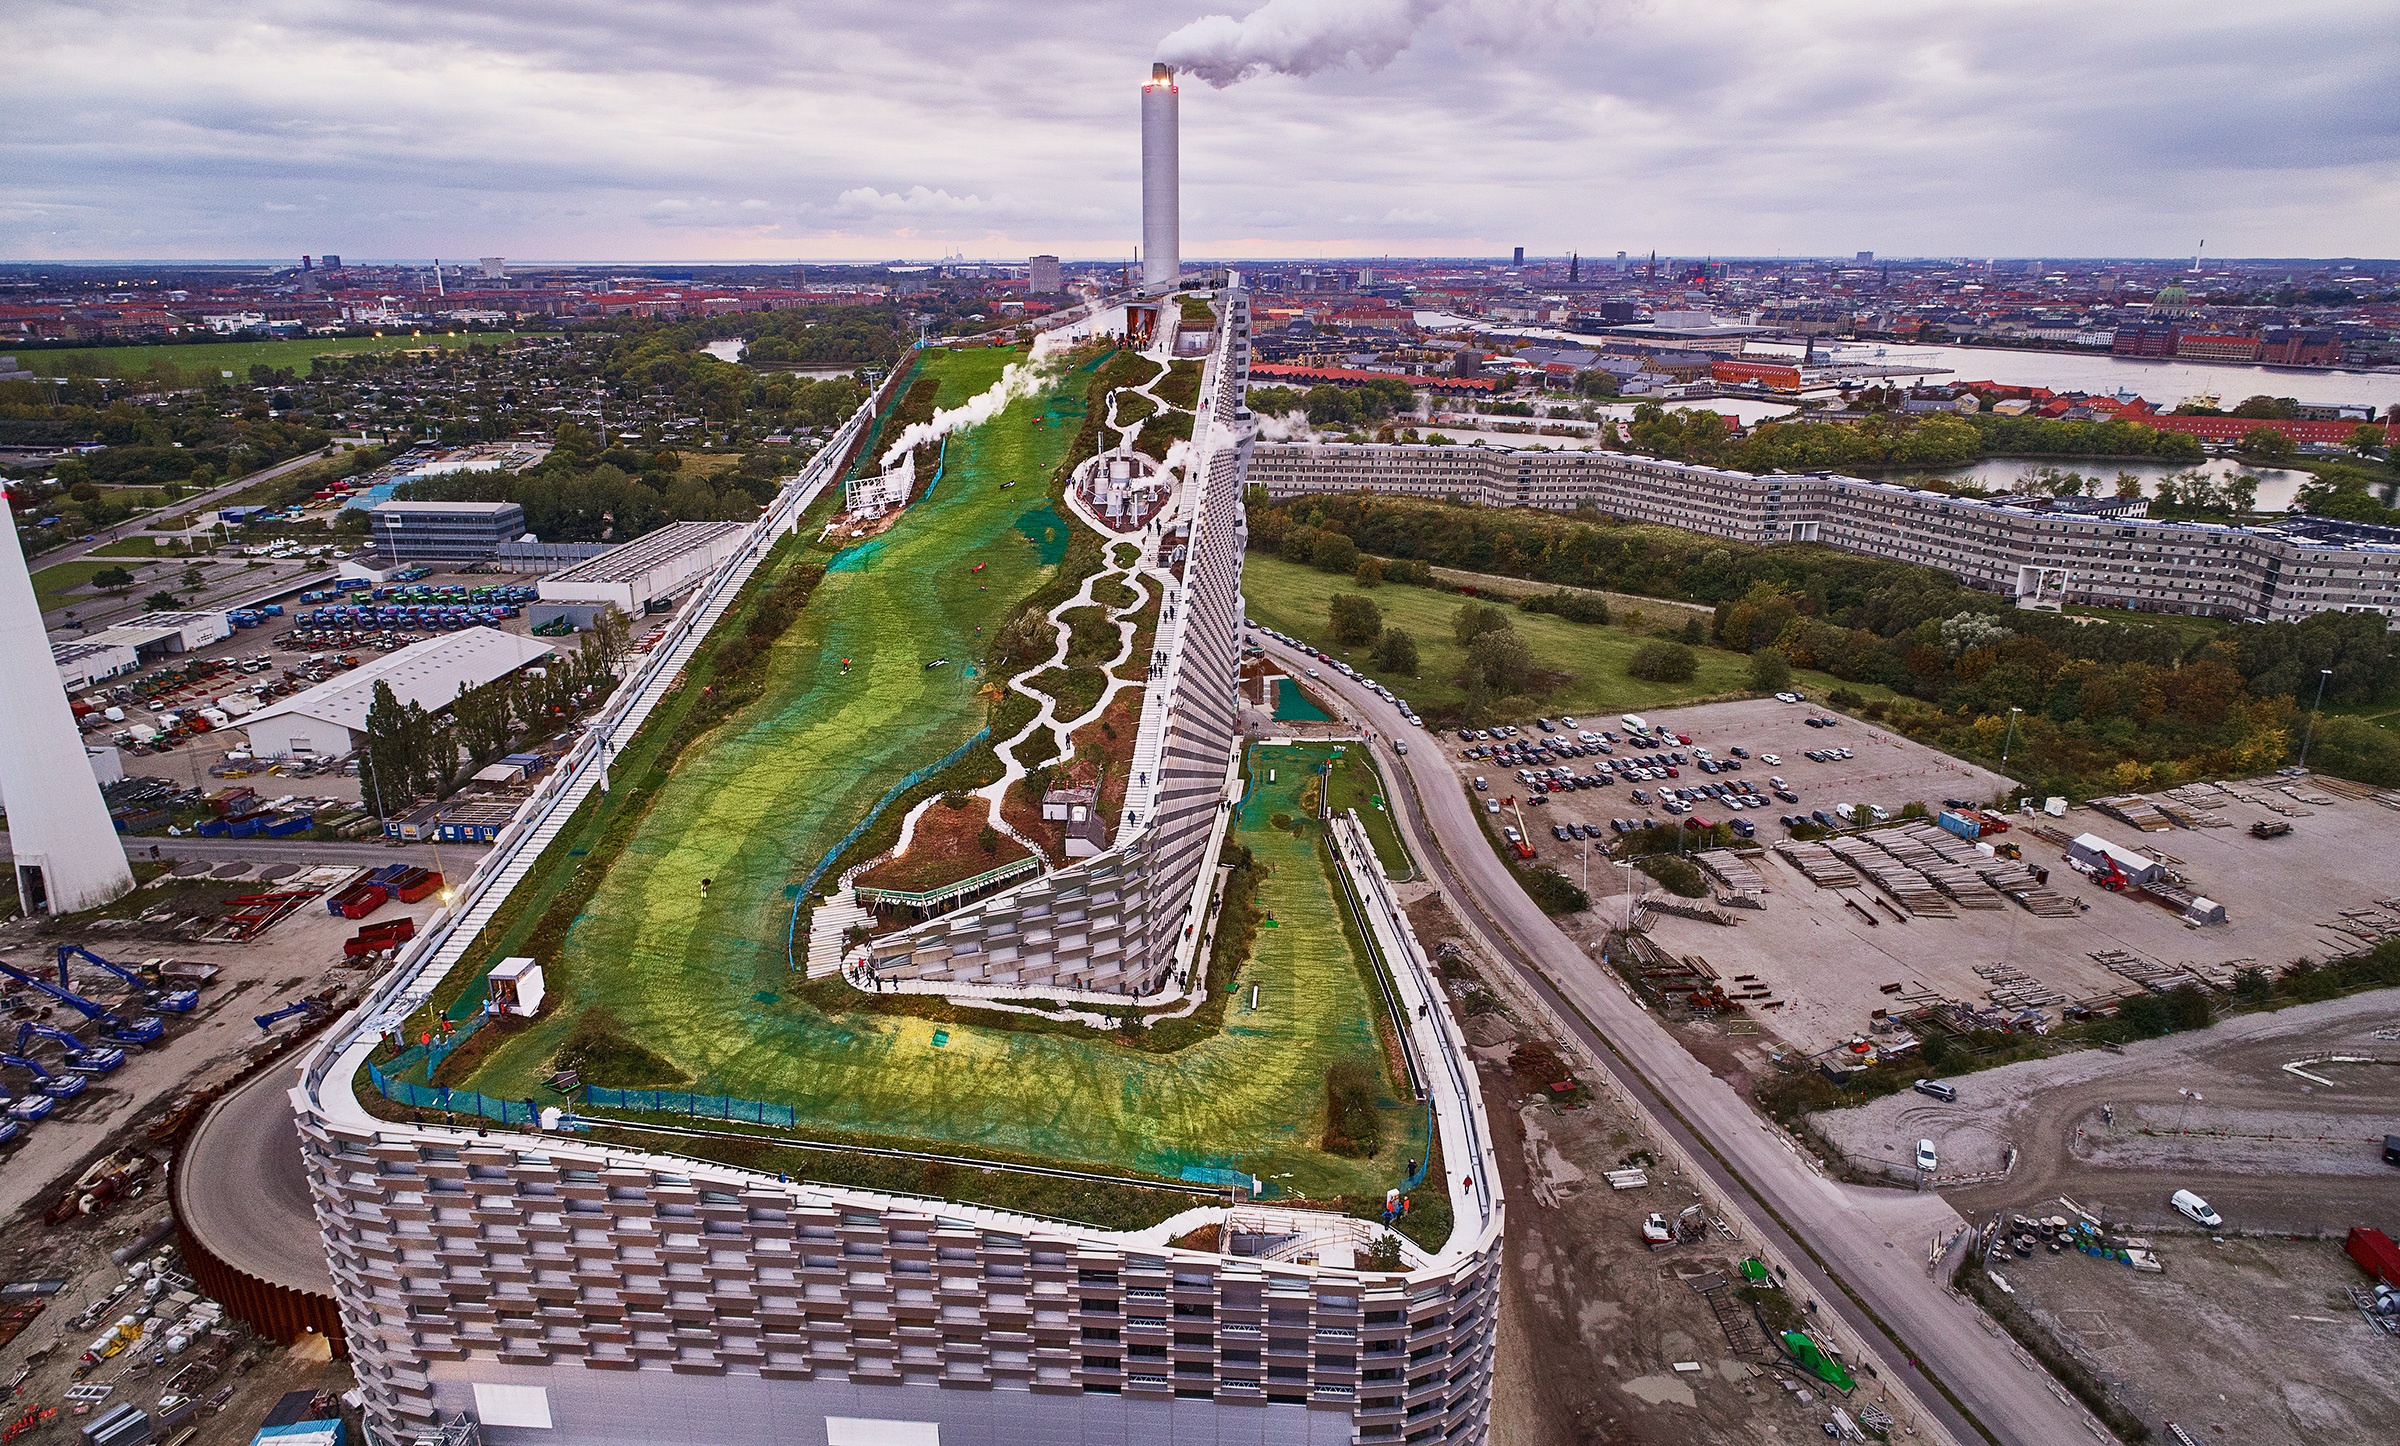 BIG's ski slope on top of a power plant, opened to the public in Copenhagen in October 2019, embodies Ingels' ethos of 